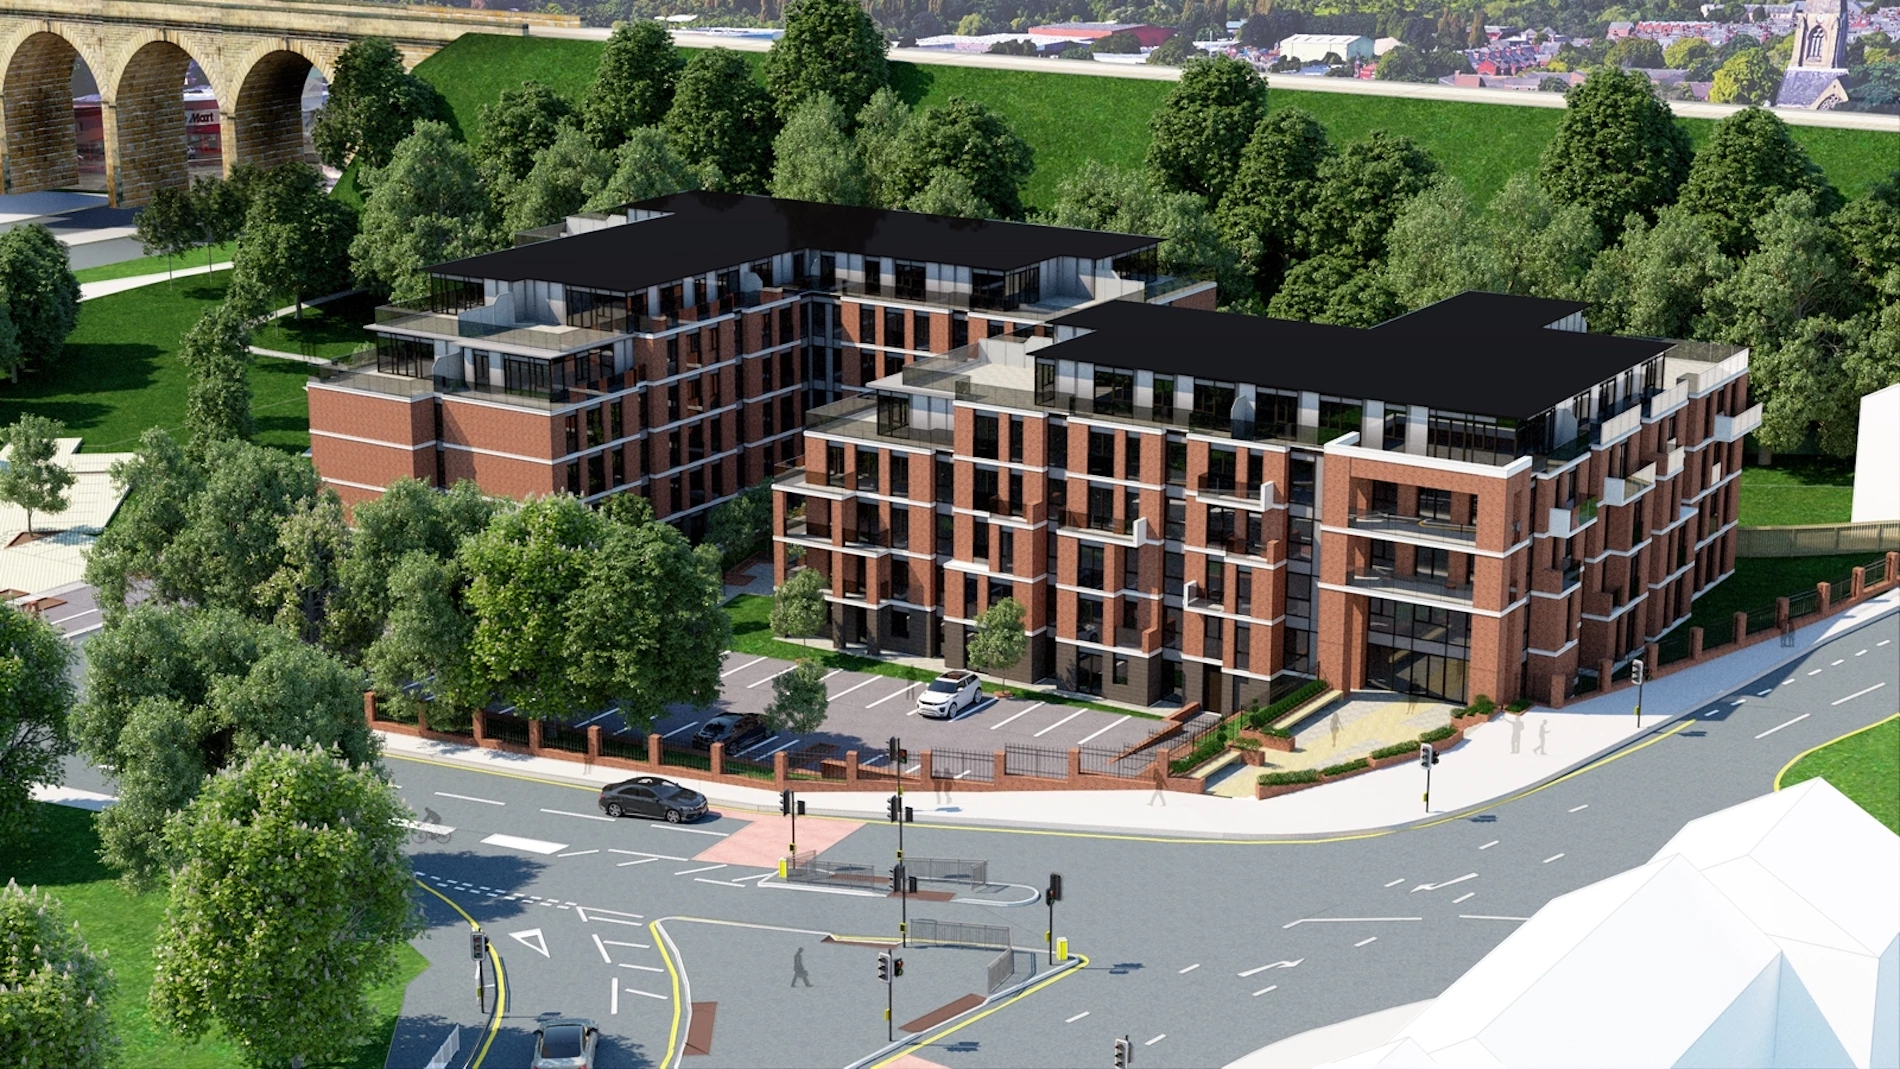 CGI of the proposed new homes development of 143 apartments.